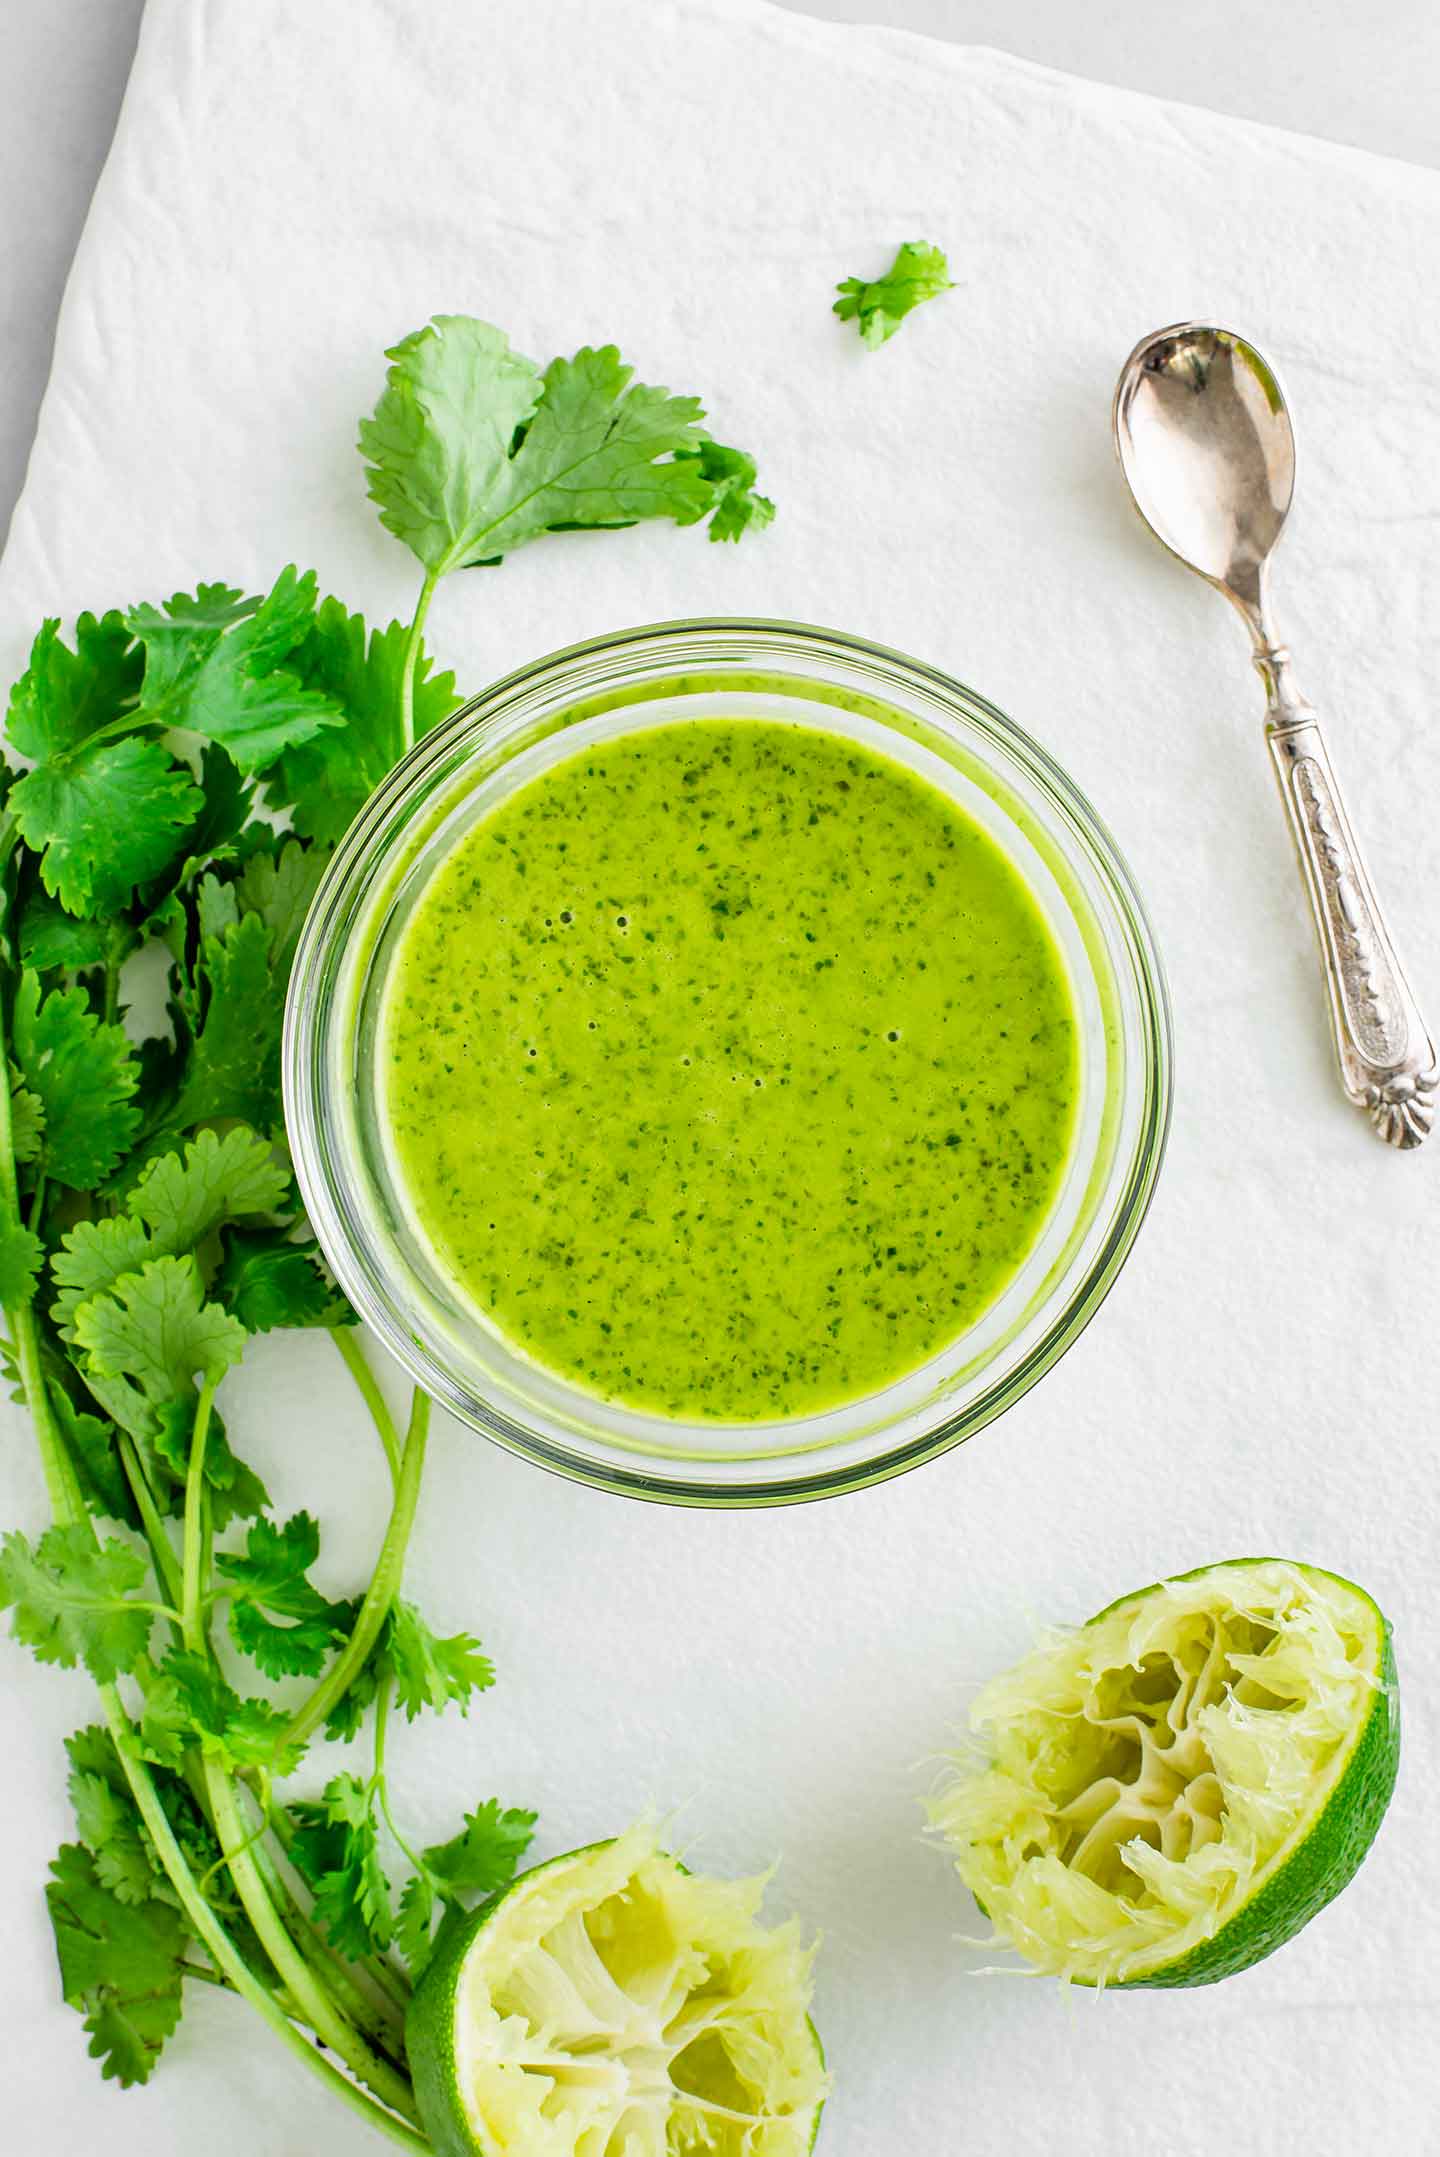 Top down view of bright green cilantro lime vinaigrette filling a small dish. A spoon lays beside the dish, as do fresh cilantro leaves, and a squeezed lime.